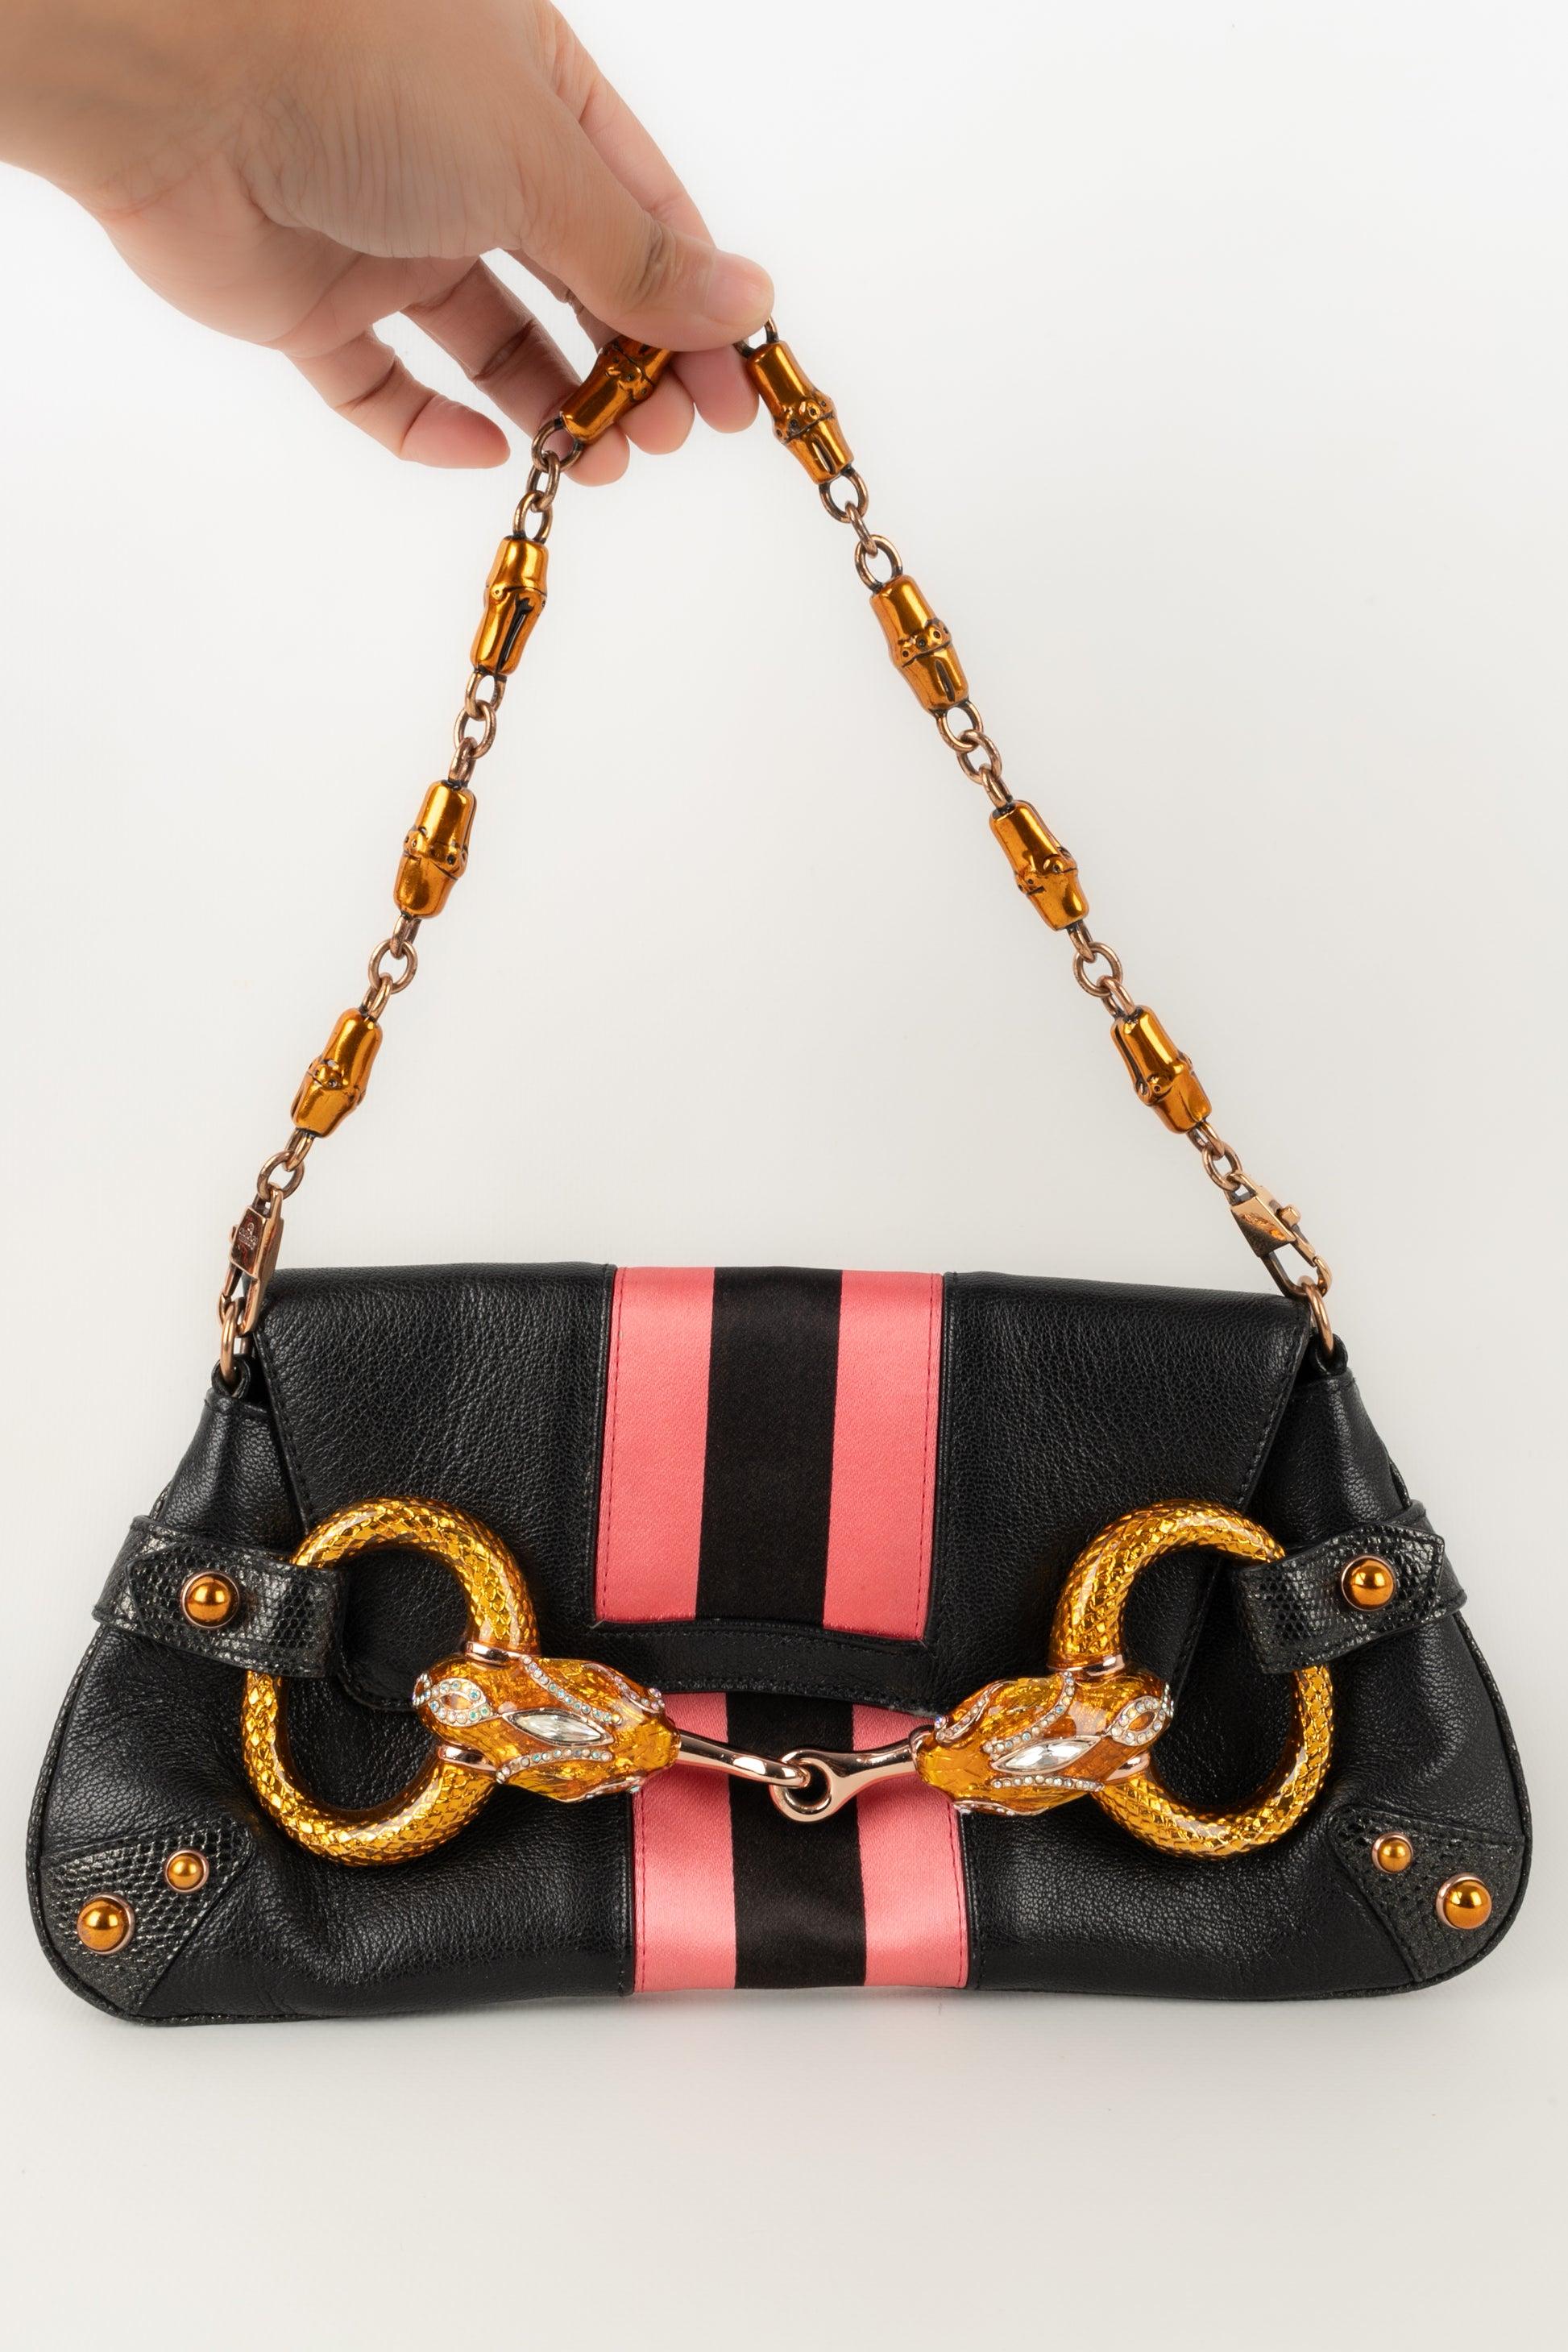 Gucci- (Made in Italy) Silk satin and black leather bag with enameled metal and rhinestones. Spring-Summer 2004 Collection.

Additional information:
Condition: Good condition
Dimensions: Length: 26 cm - Height: 14 cm - Depth: 2 cm - Handle: 44